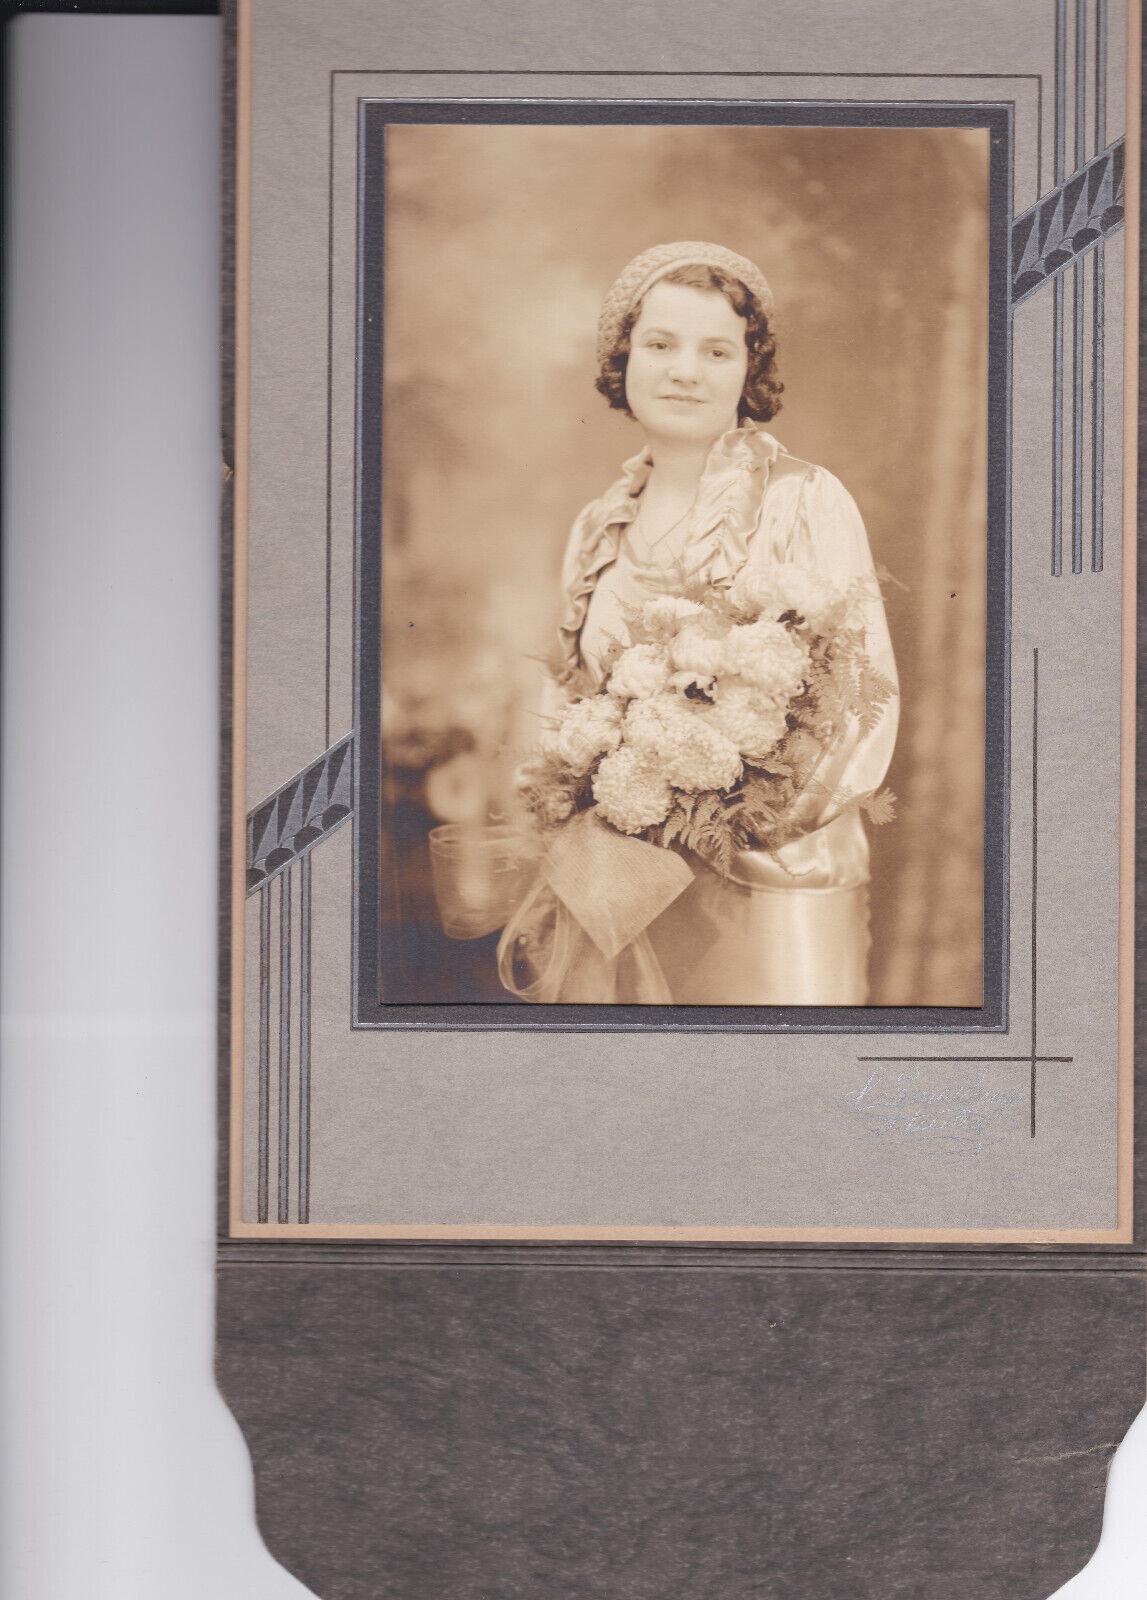 VINTAGE PHOTOGRAPH. Circa 1930s? Girl With Flowers